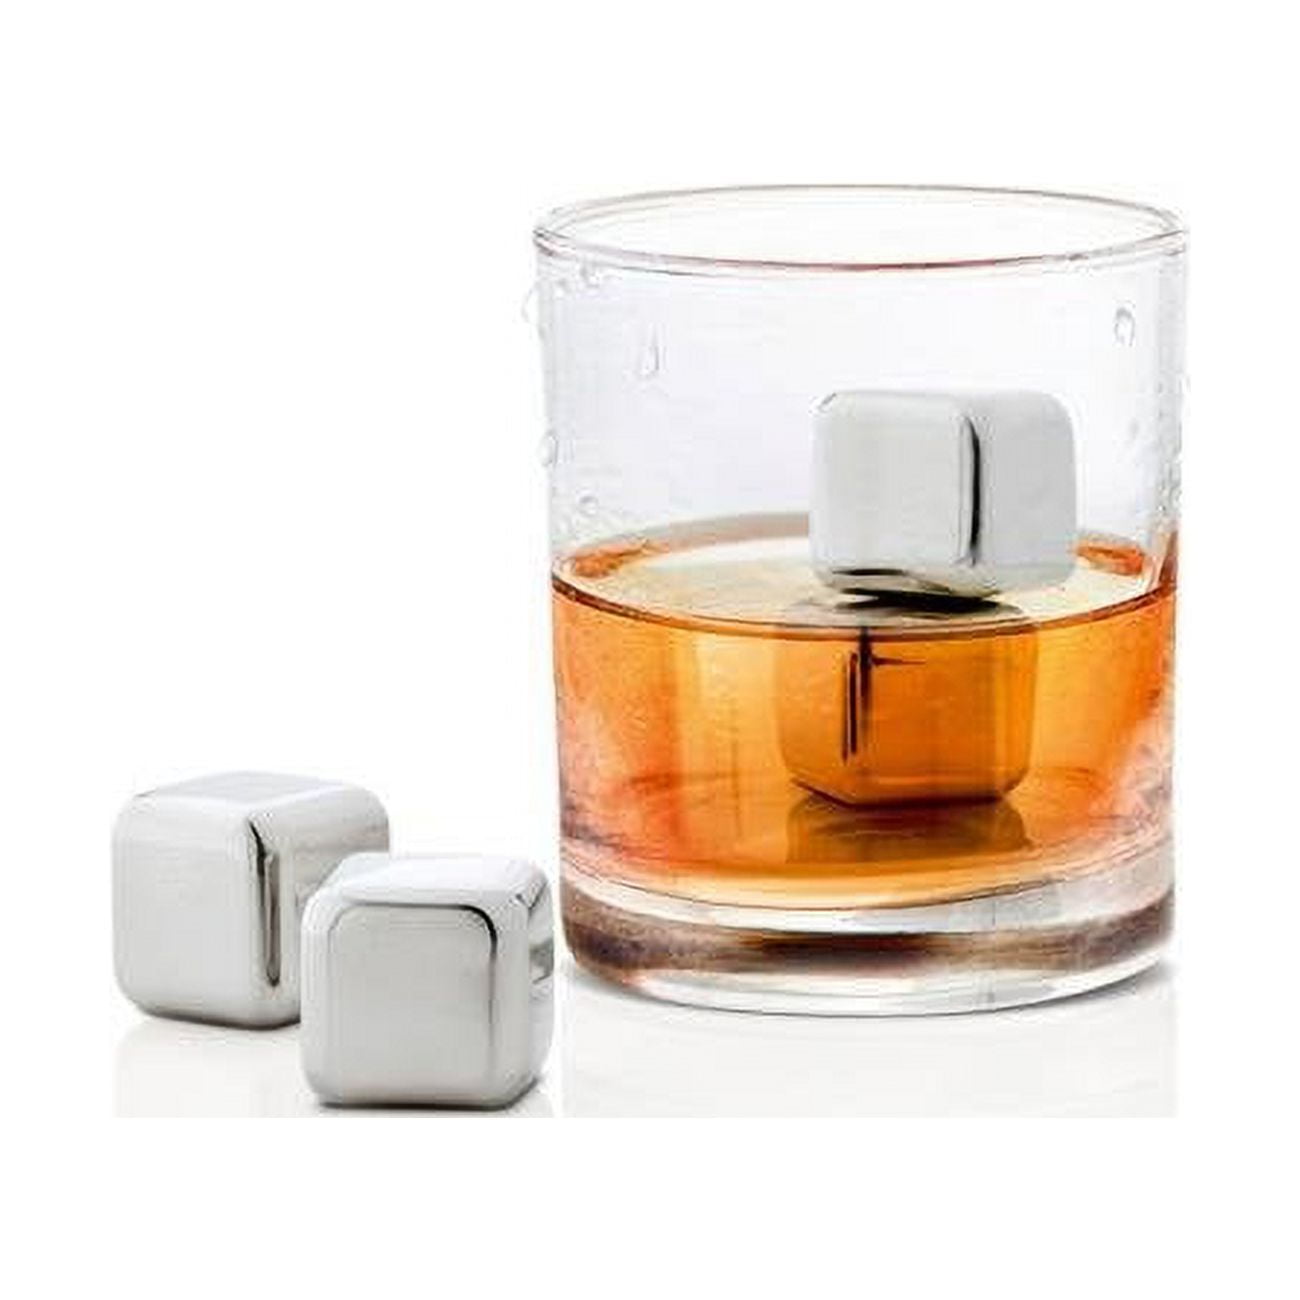 Picture of Blomus 63539 Stainless Steel Ice Cubes, Set of 4